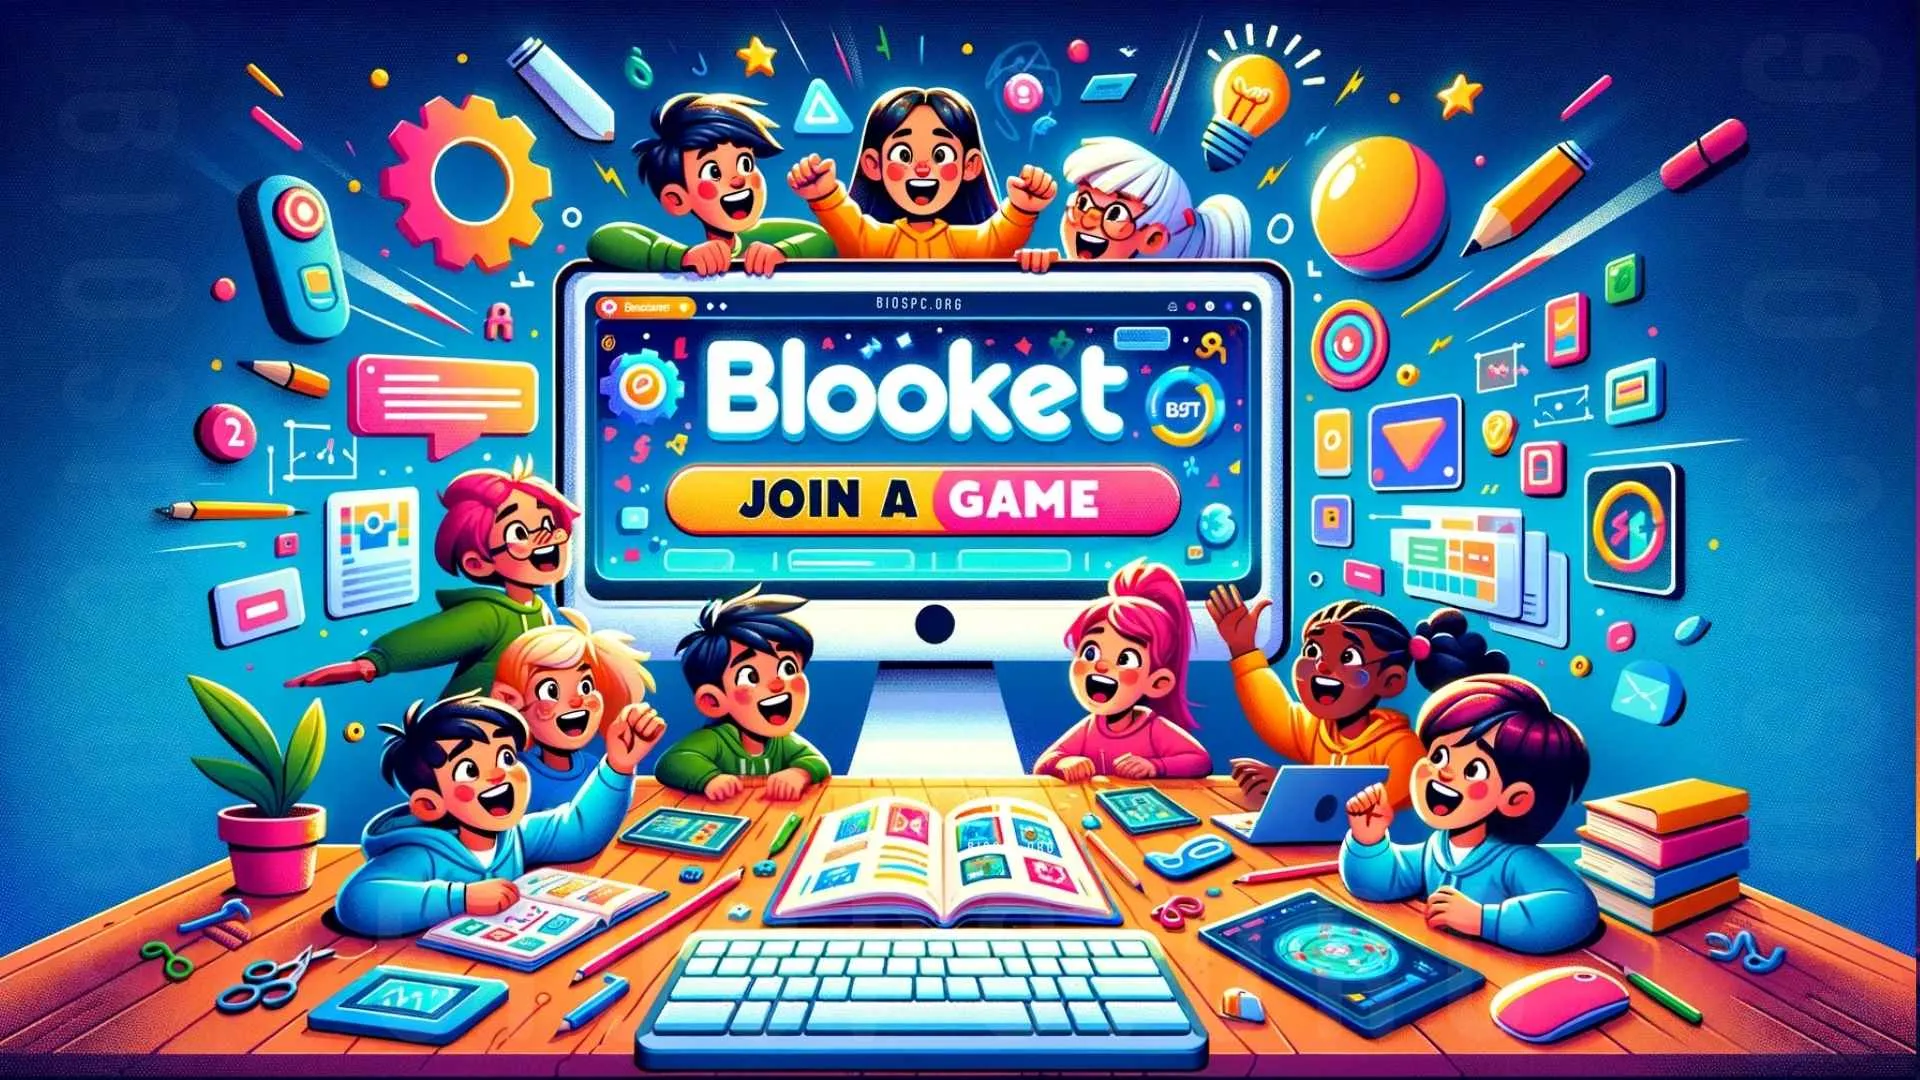 How To Play Blooket Join Game